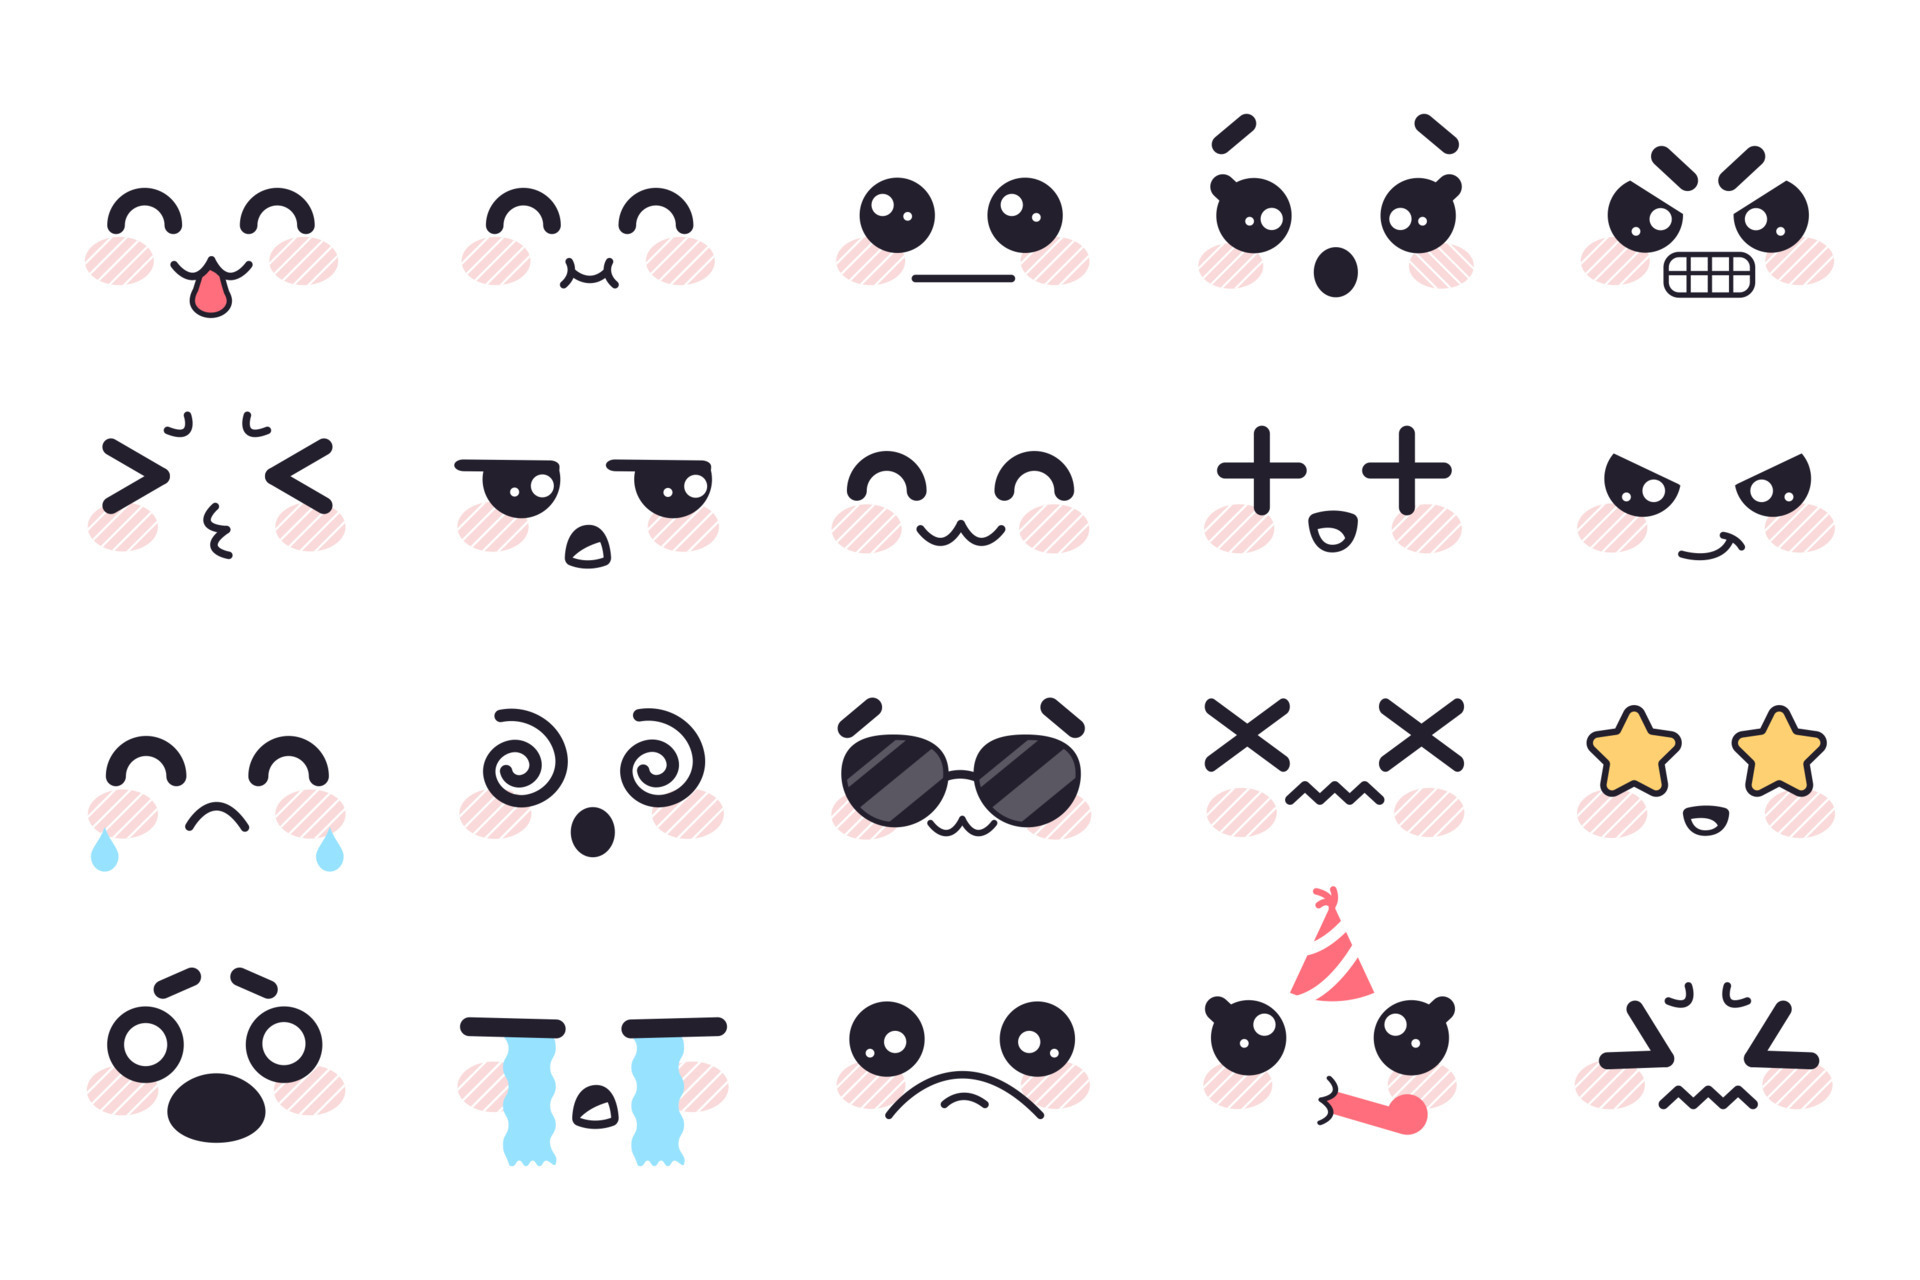 Score Anime Emoticons by chee.w.tze on Threadless